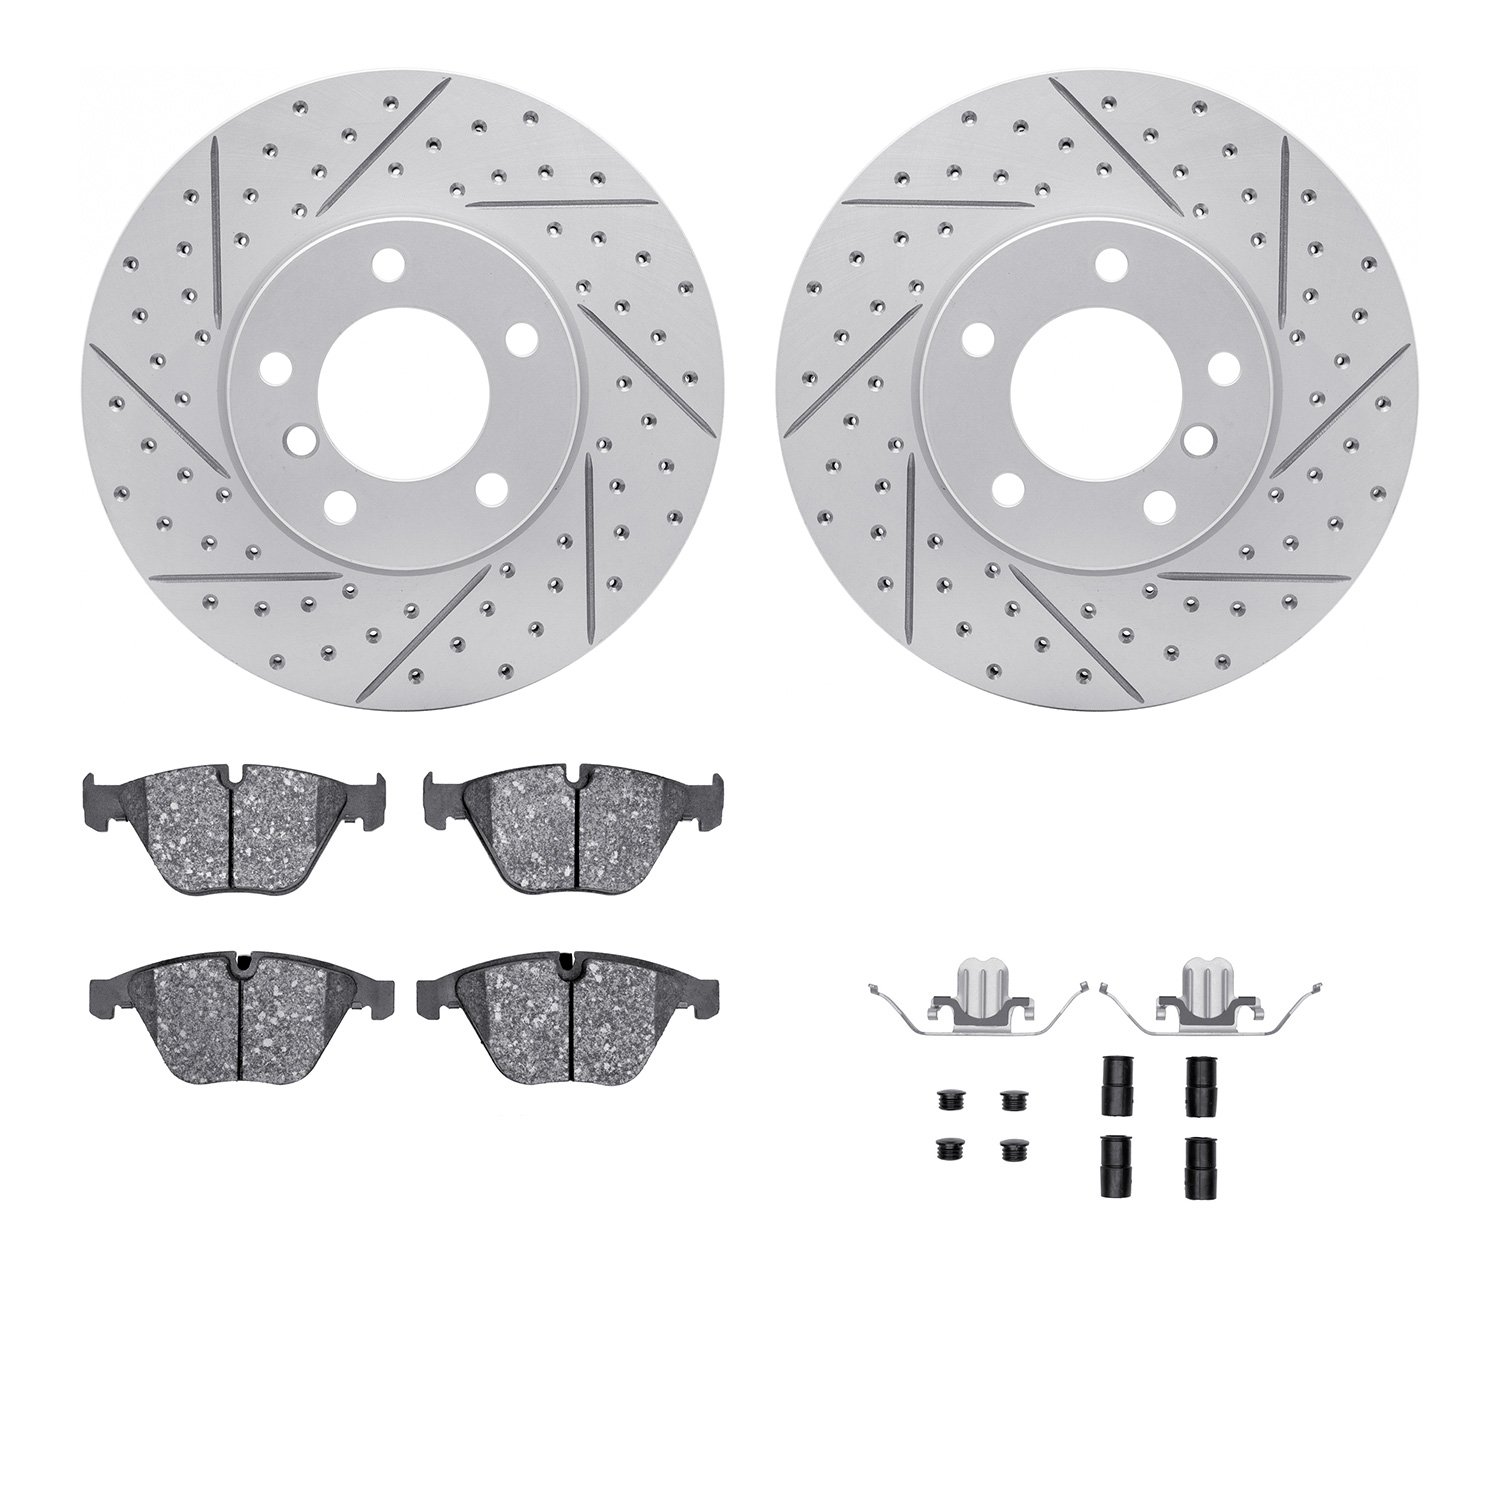 2512-31305 Geoperformance Drilled/Slotted Rotors w/5000 Advanced Brake Pads Kit & Hardware, 2007-2013 BMW, Position: Front